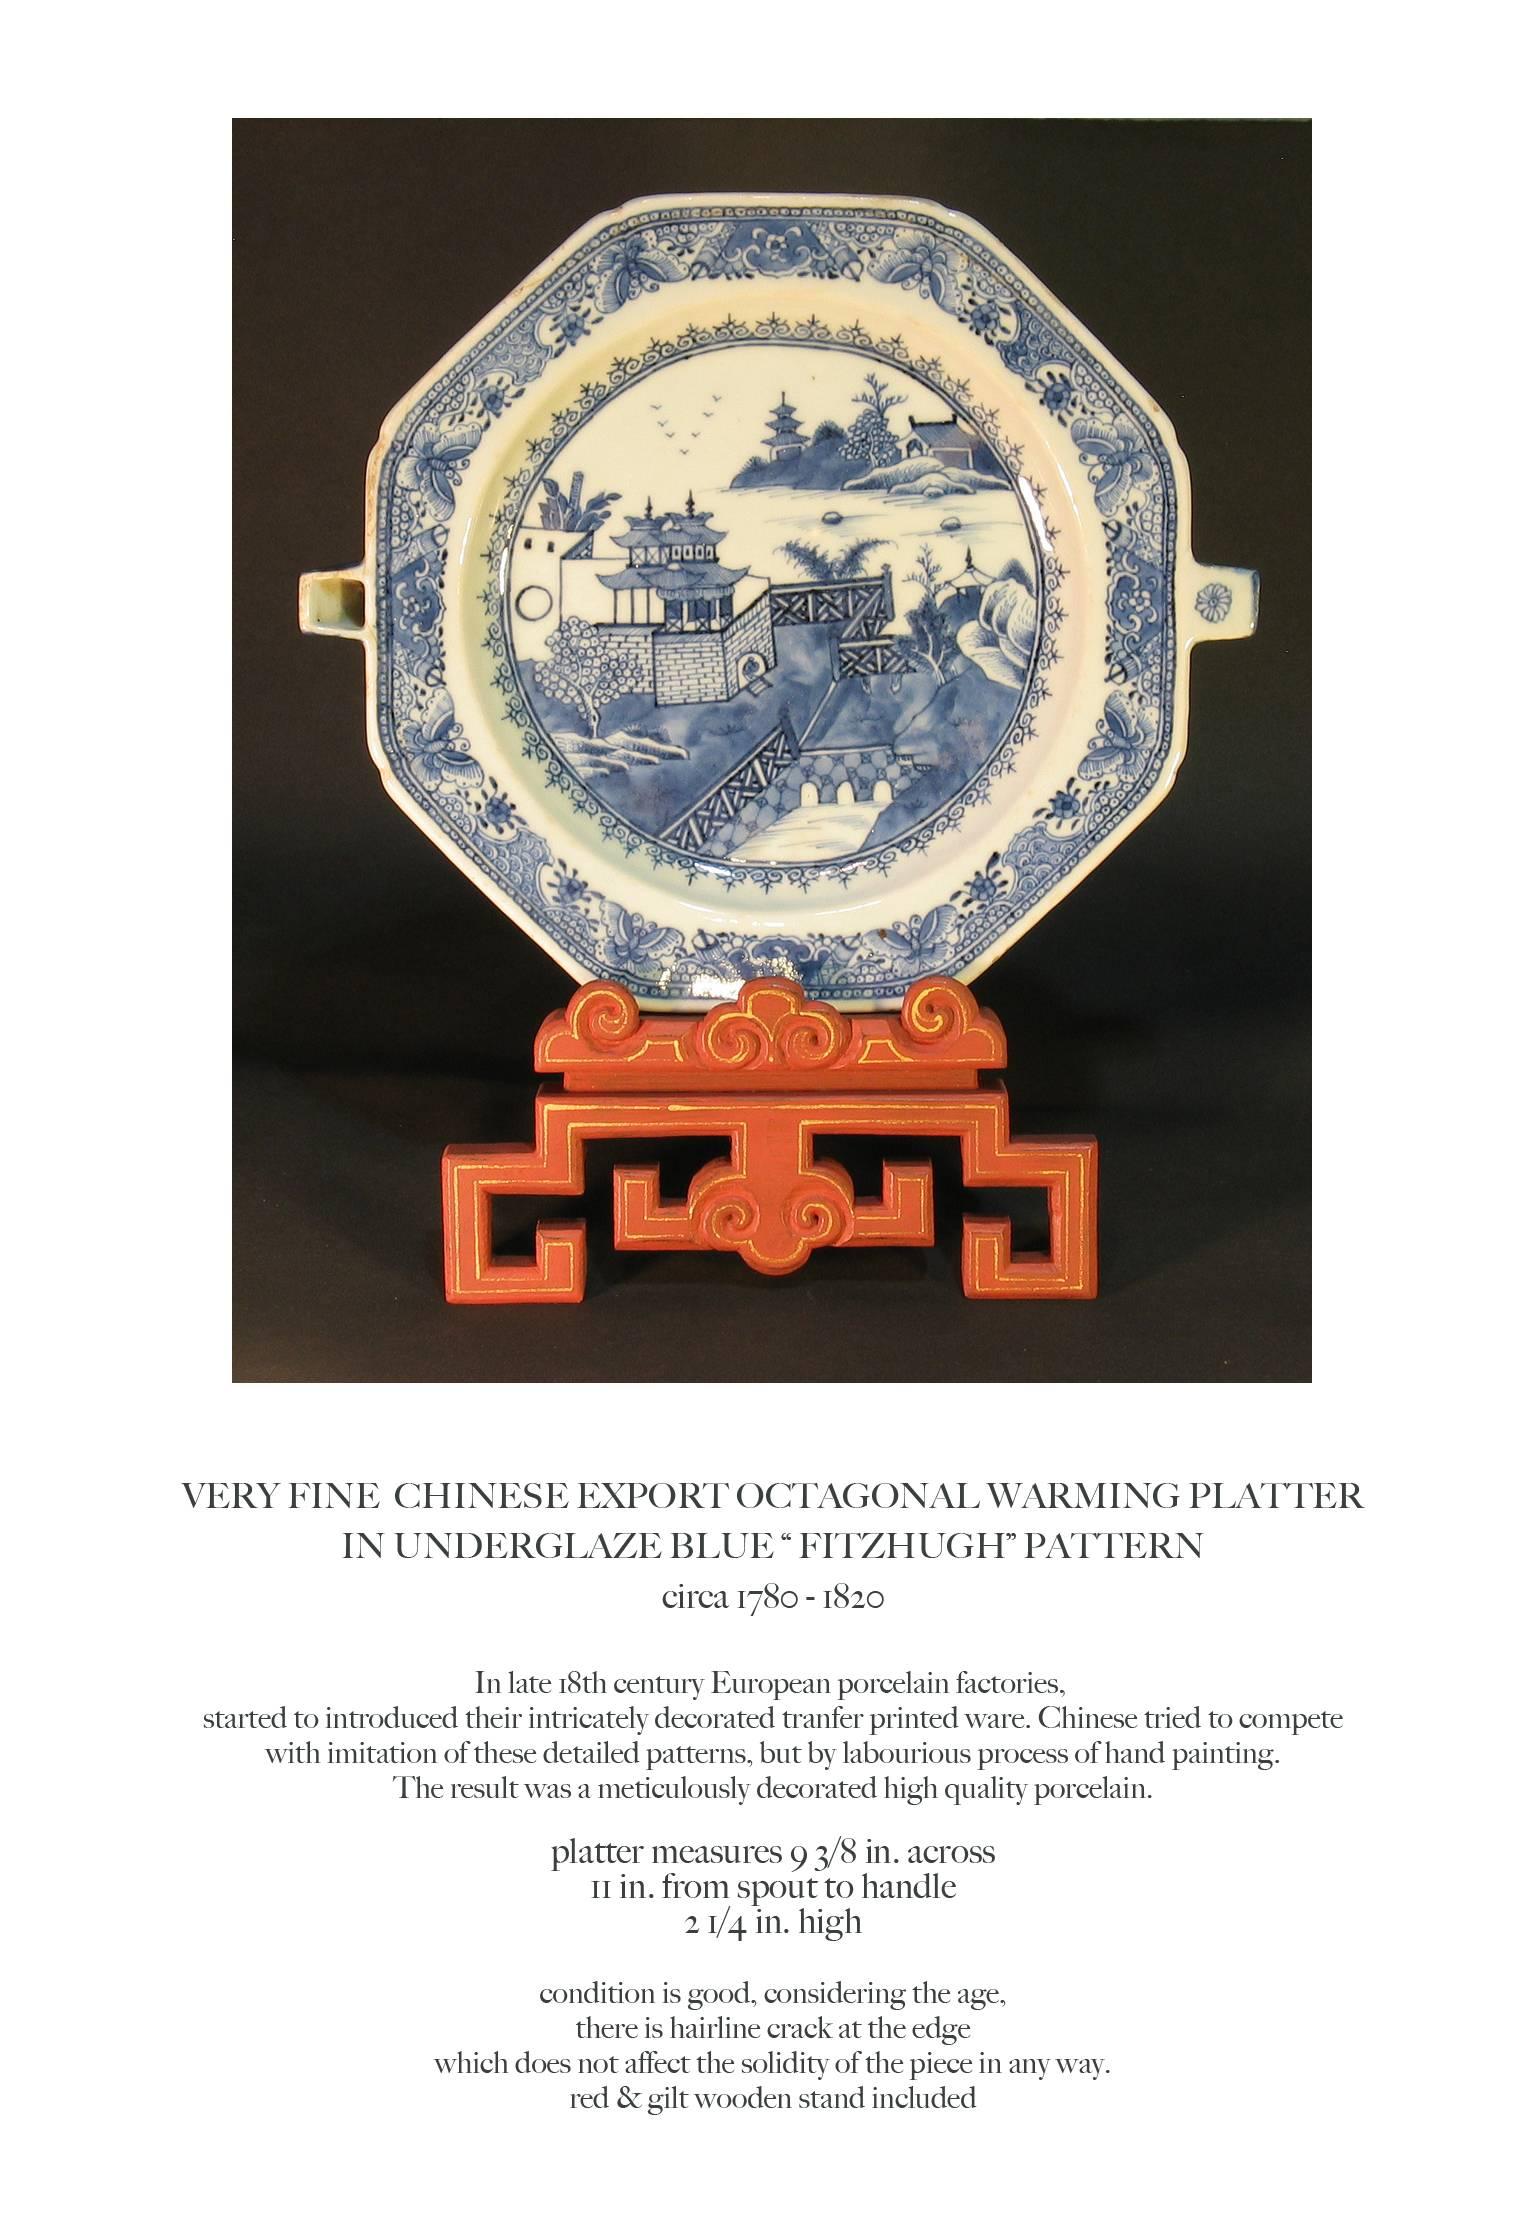 A very fine Chinese export octagonal warming platter in under glaze blue "Fitzhugh" pattern, circa 1780-1820. In late 18th century European porcelain factories, started to introduce their intricately decorated transfer printed ware. The